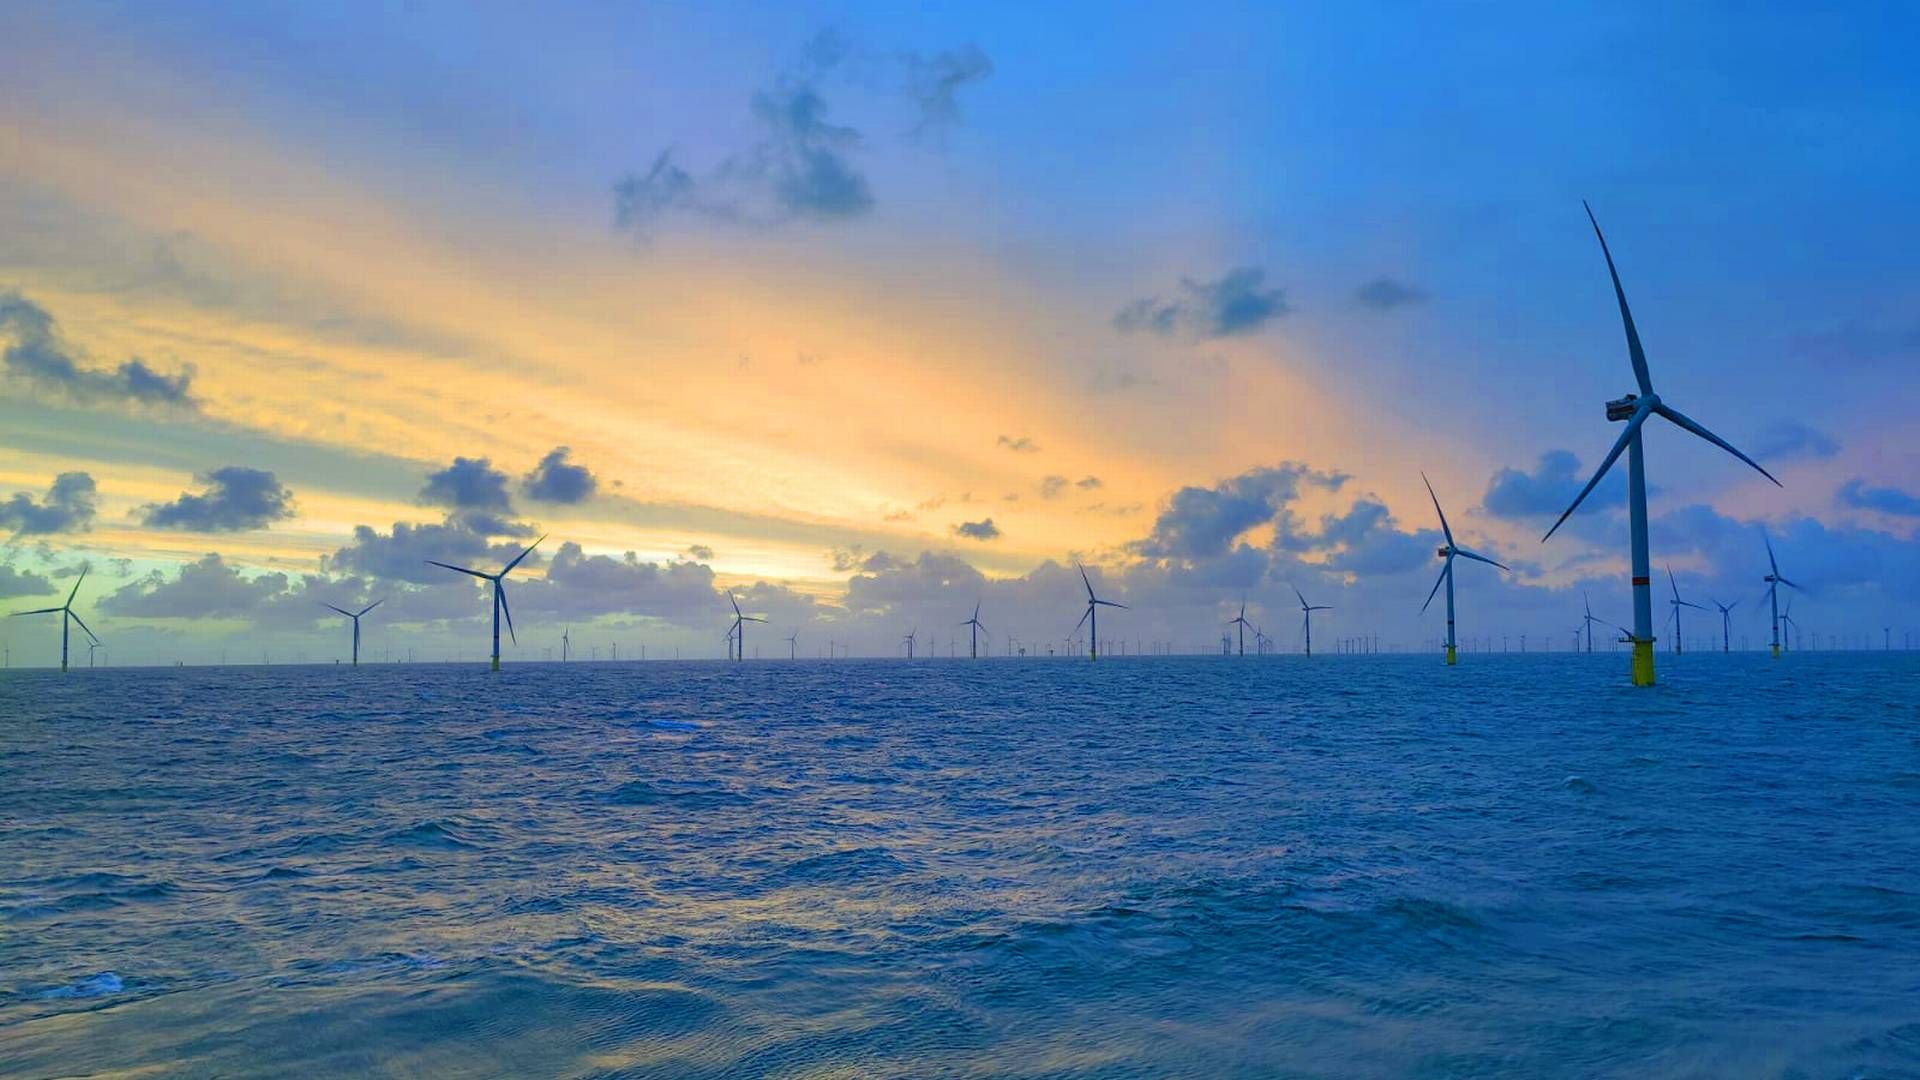 Ocean Winds, alongside an old partner, will bid for 1 GW in an upcoming French offshore wind tender. | Photo: Ocean Winds